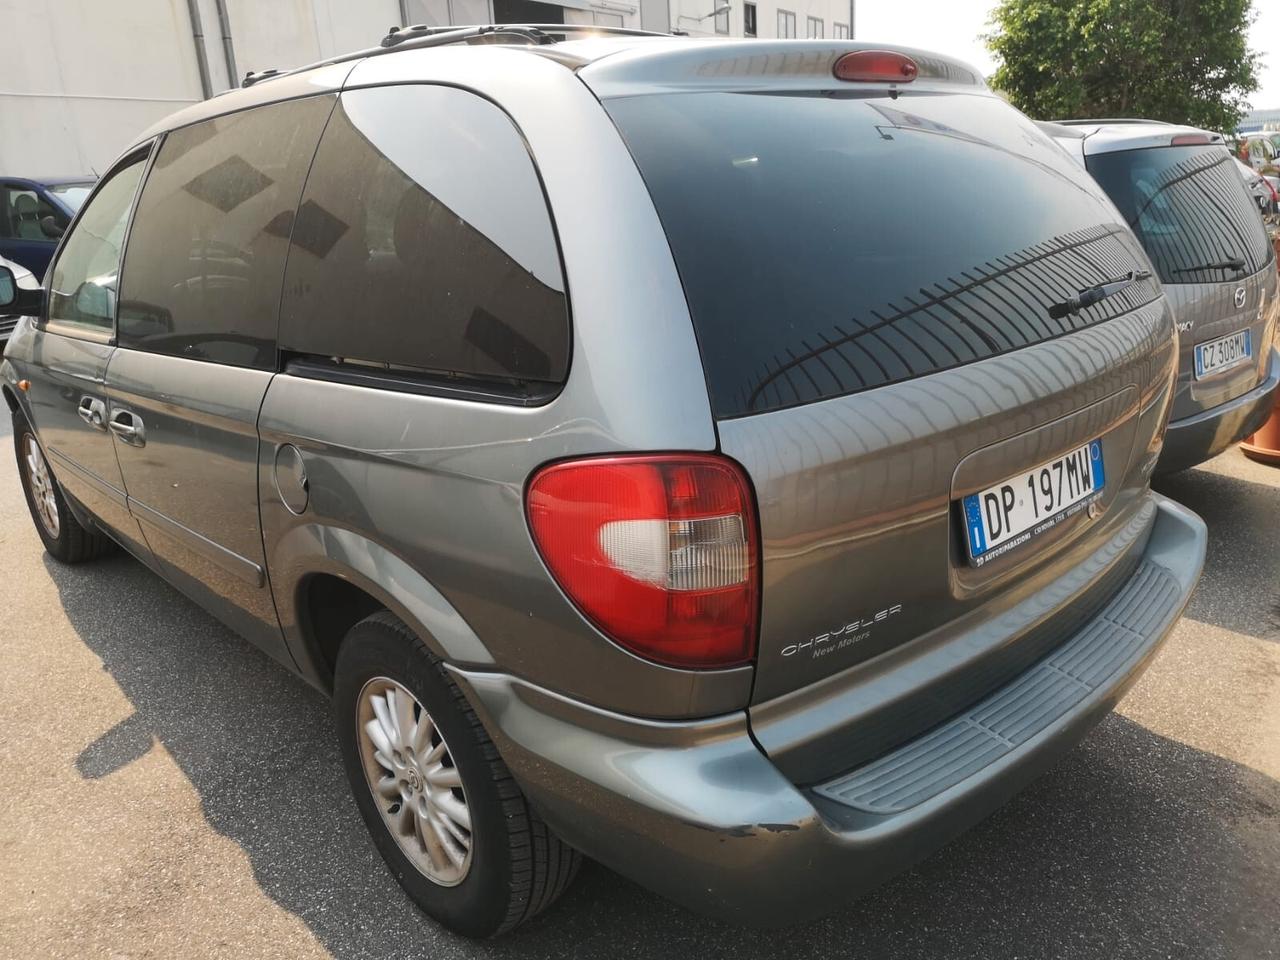 Chrysler Voyager Grand Voyager 2.8 CRD DPF Limited